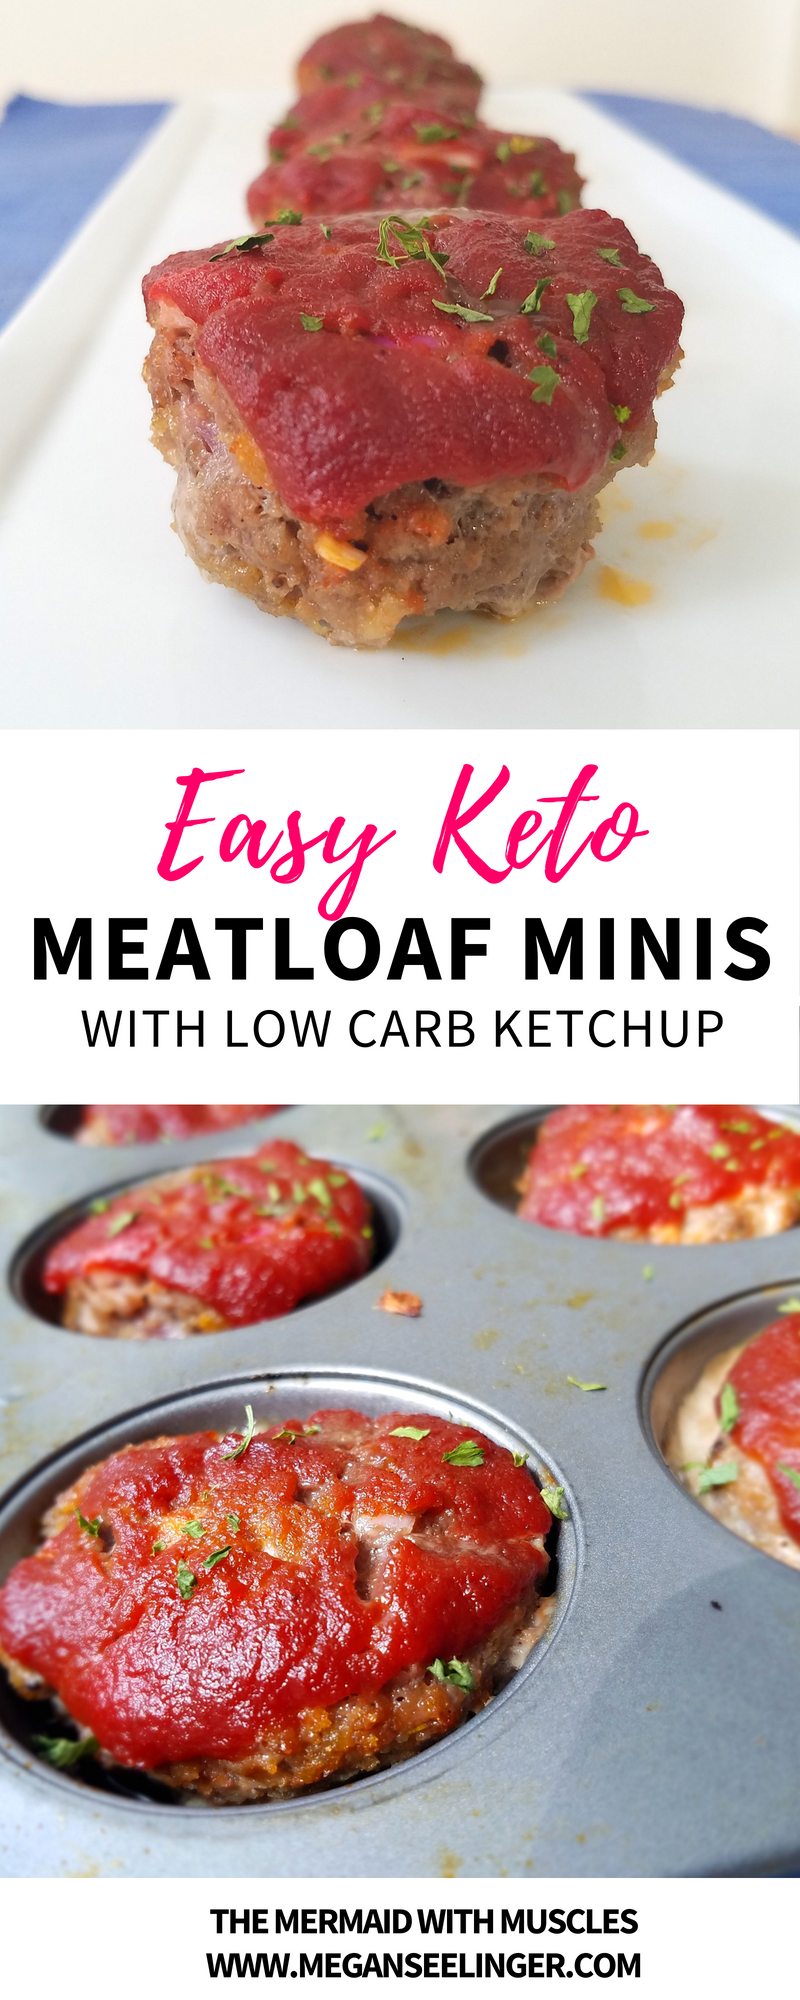 The Best Keto Meatloaf Minis with Low Carb Ketchup -   21 keto recipes meatballs
 ideas